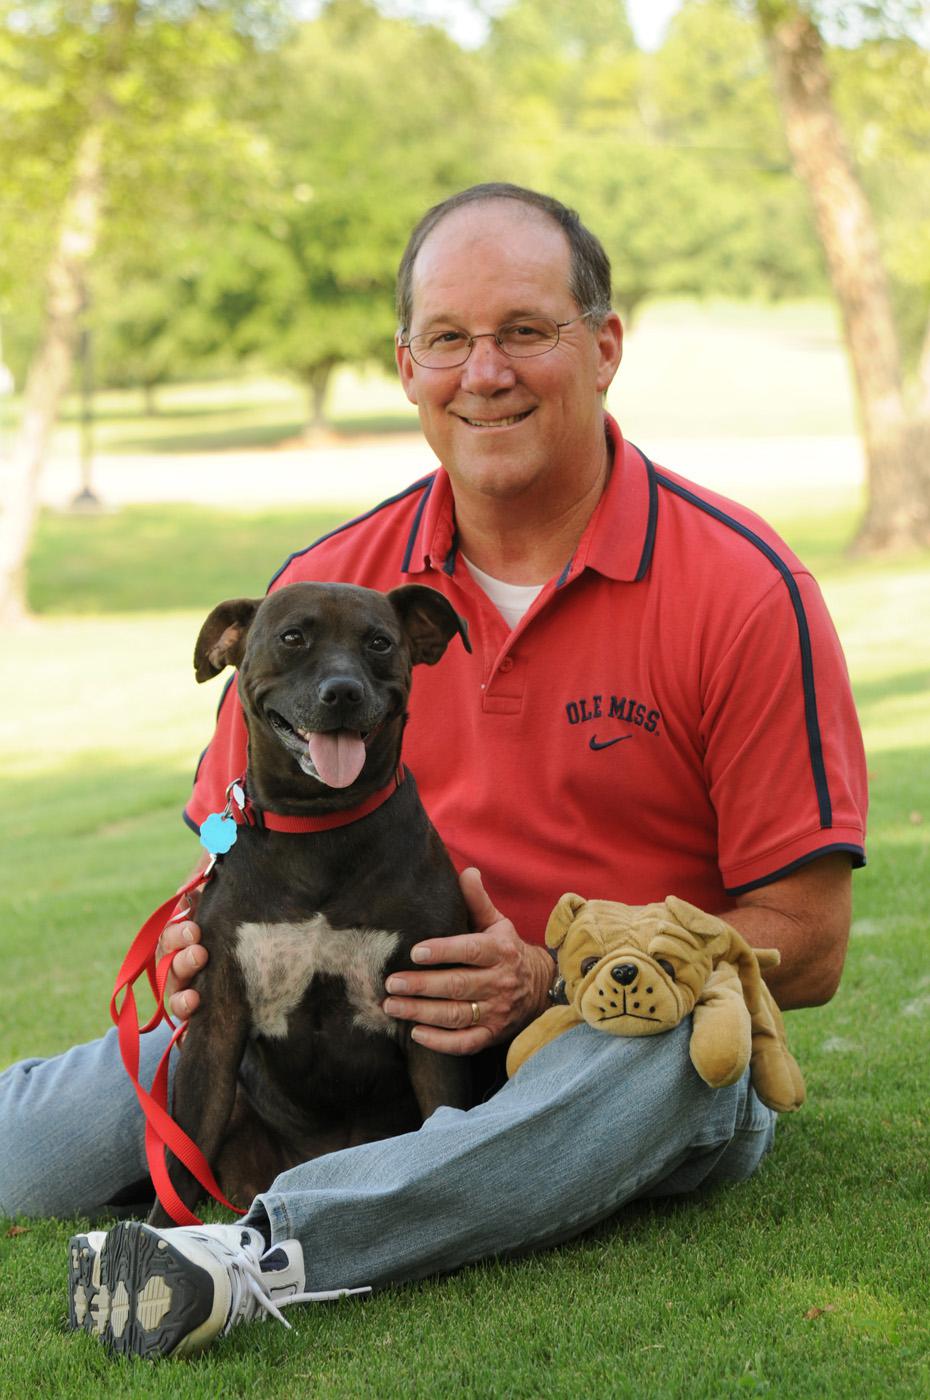 When Ole Miss alumnus Tommy Walker brought Tayson for a reunion with the critical care staff at Mississippi State University's College of Veterinary Medicine, the two left with a memento of the Bulldog welcome they received.